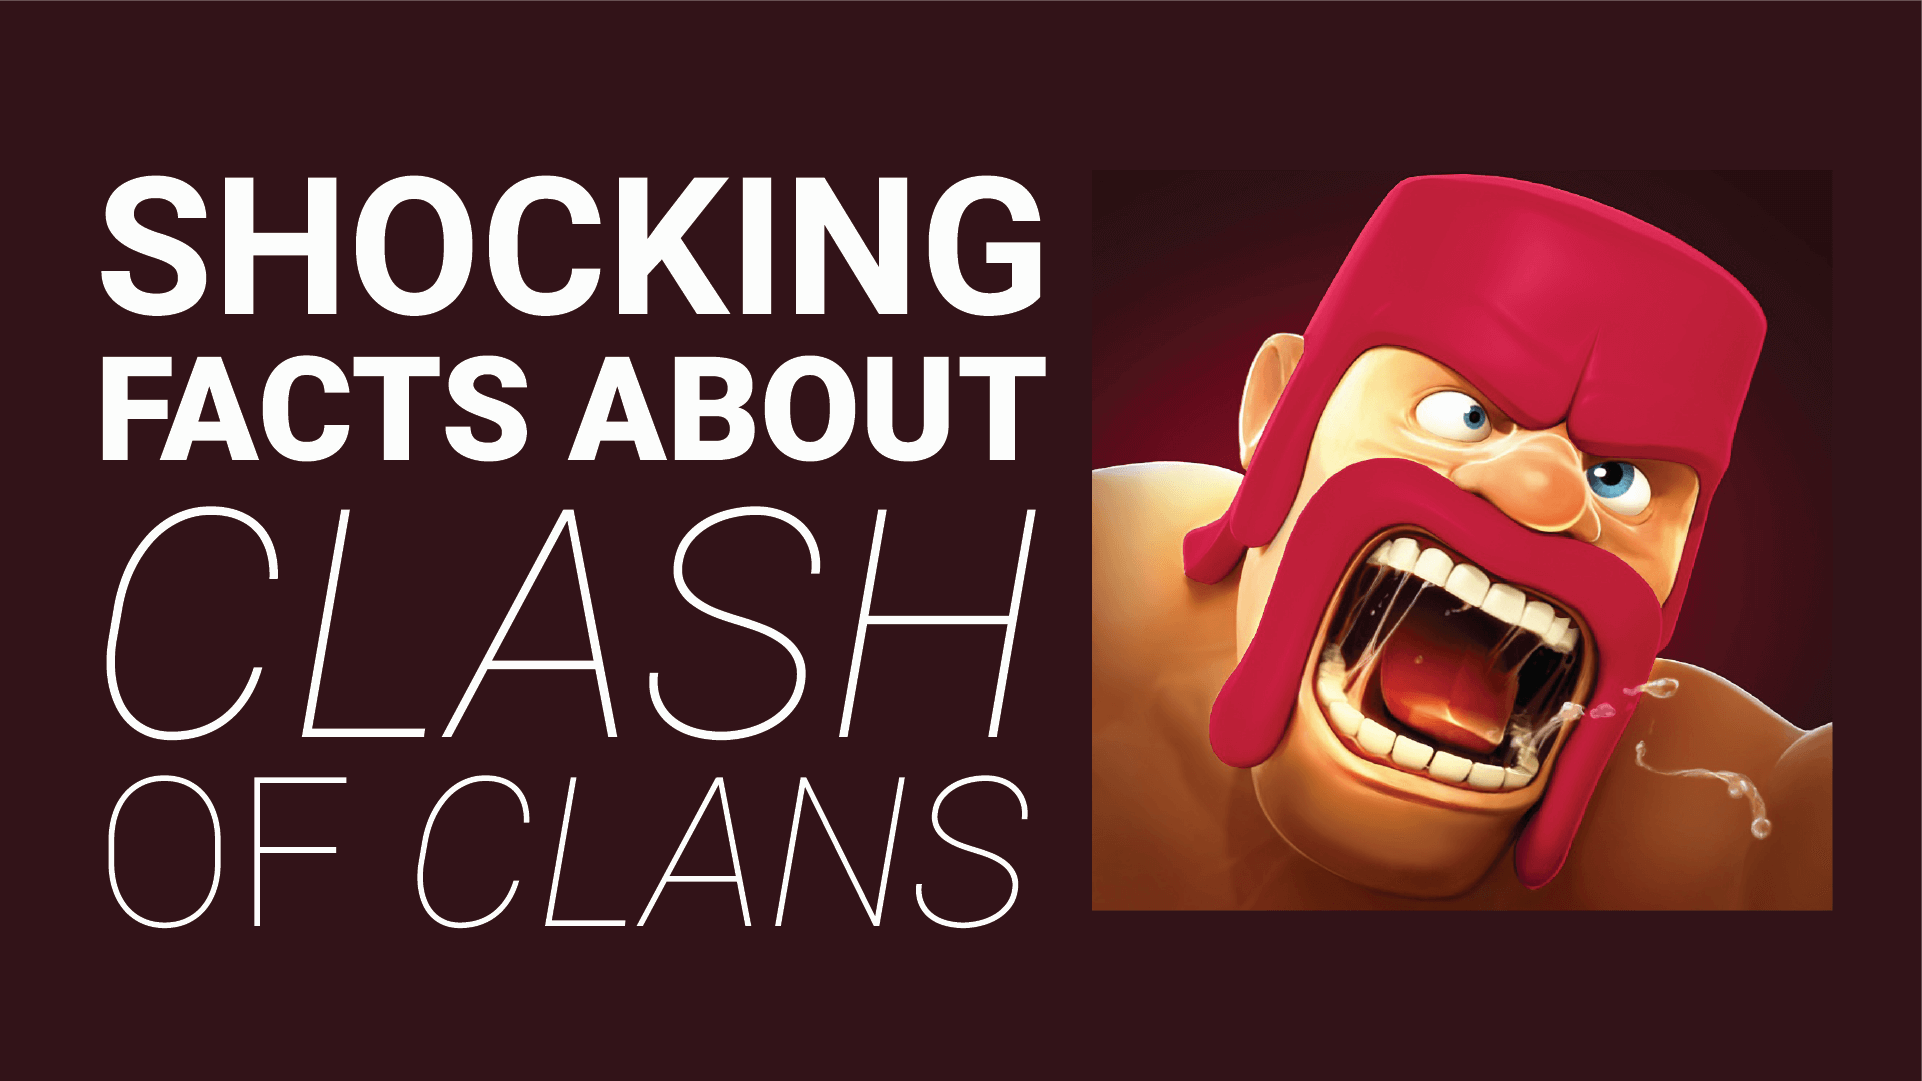 Shocking facts about clash of clans androtrends